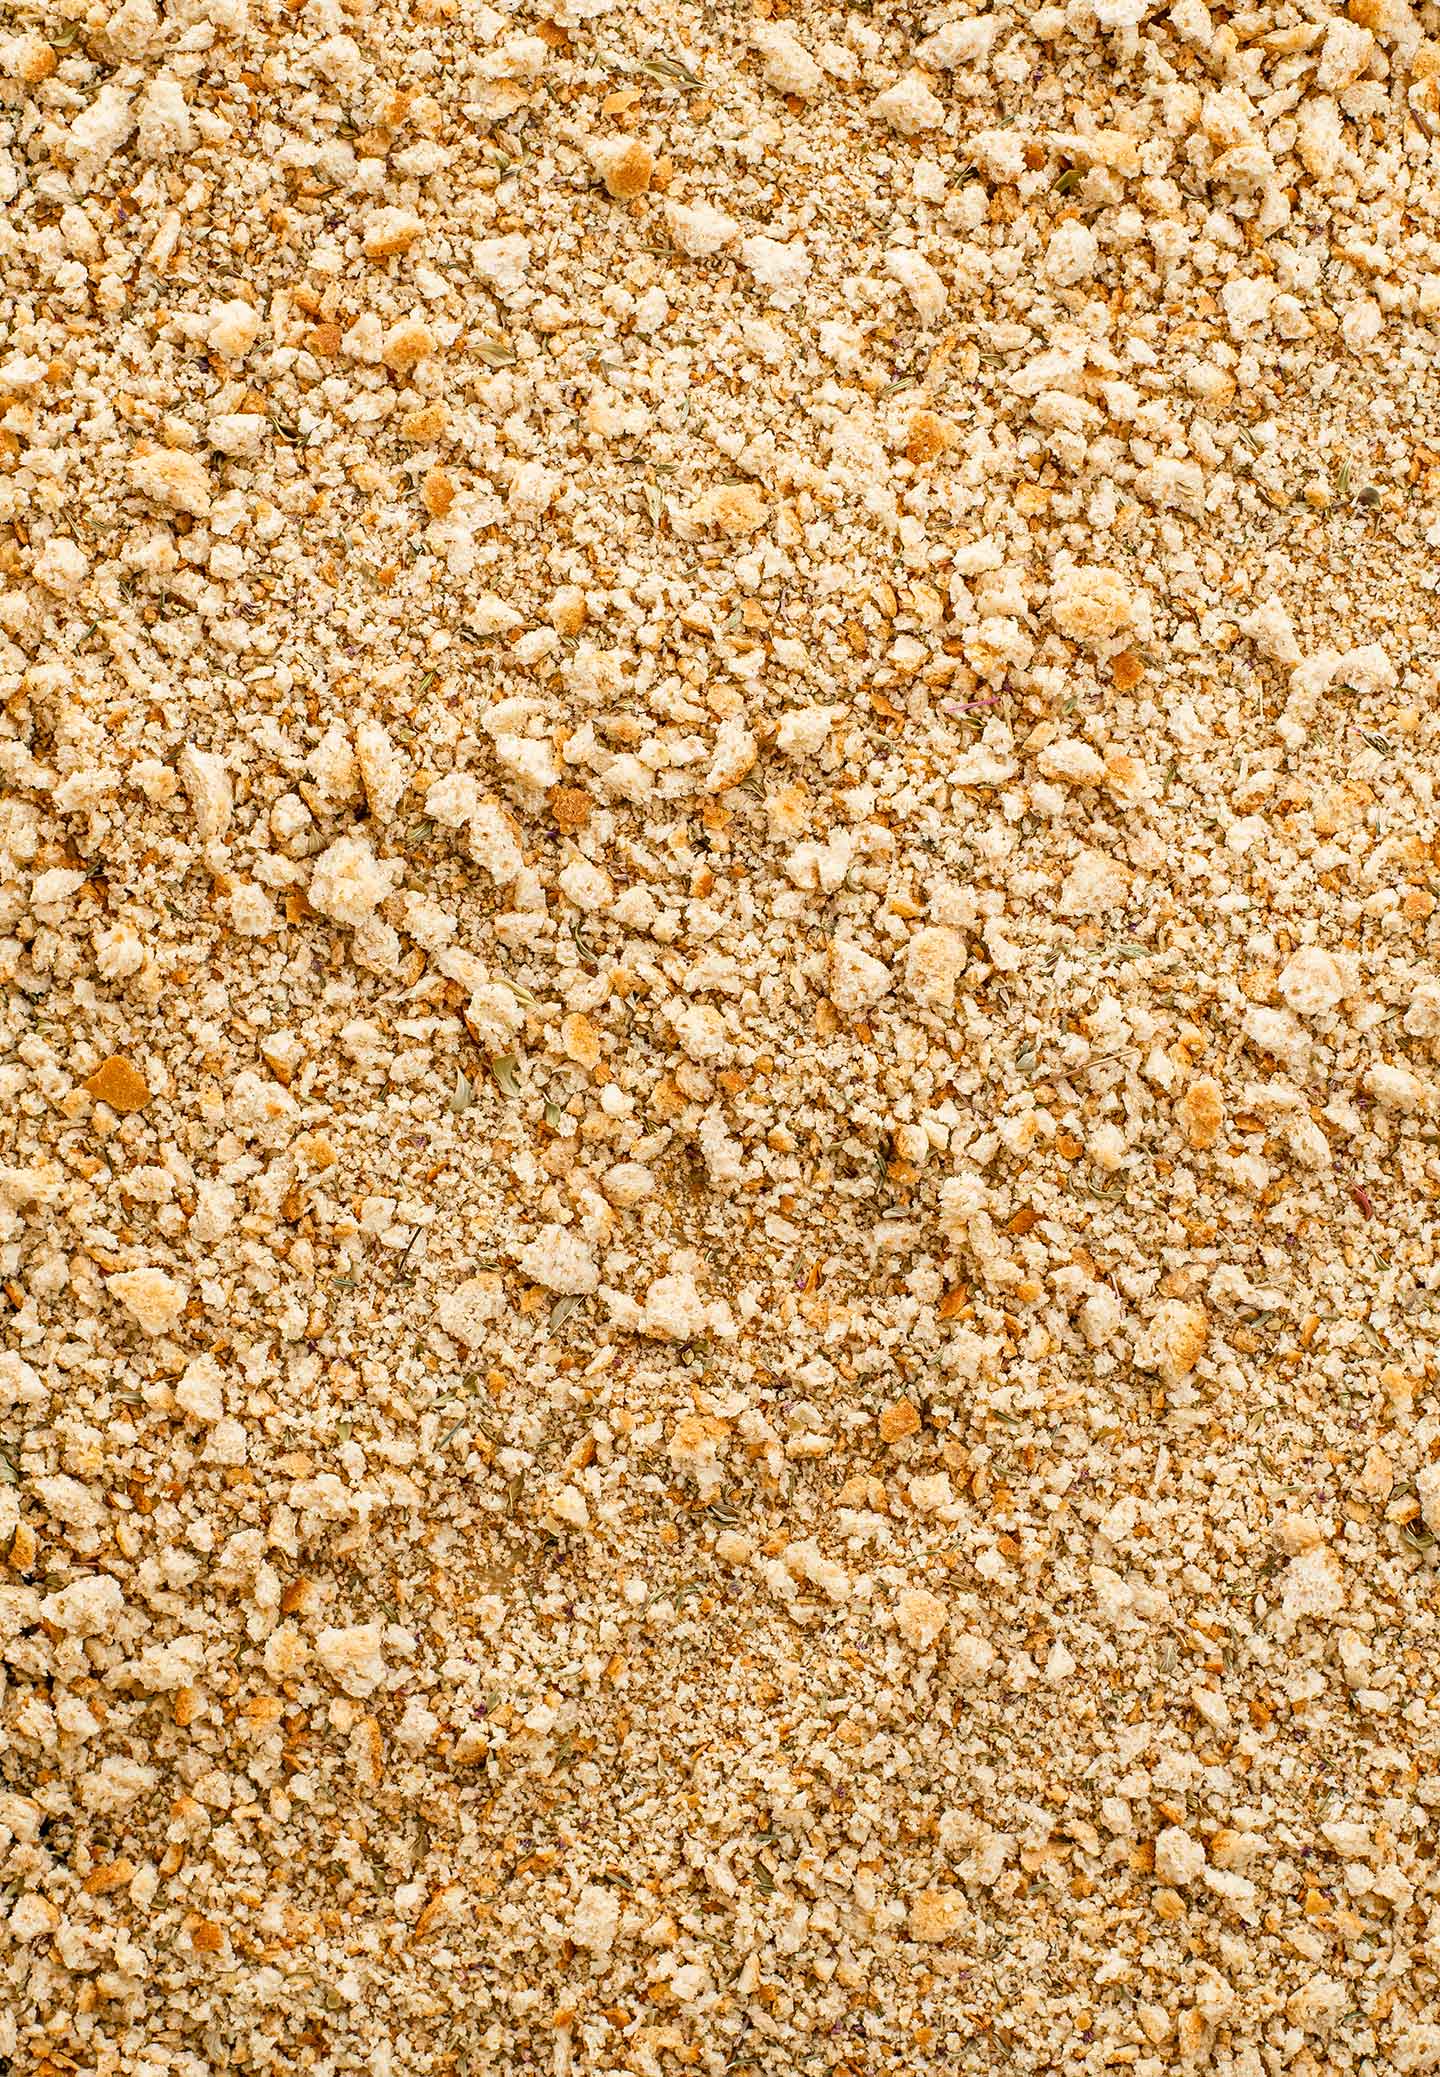 Top down view of quick and easy homemade breadcrumbs filling the image